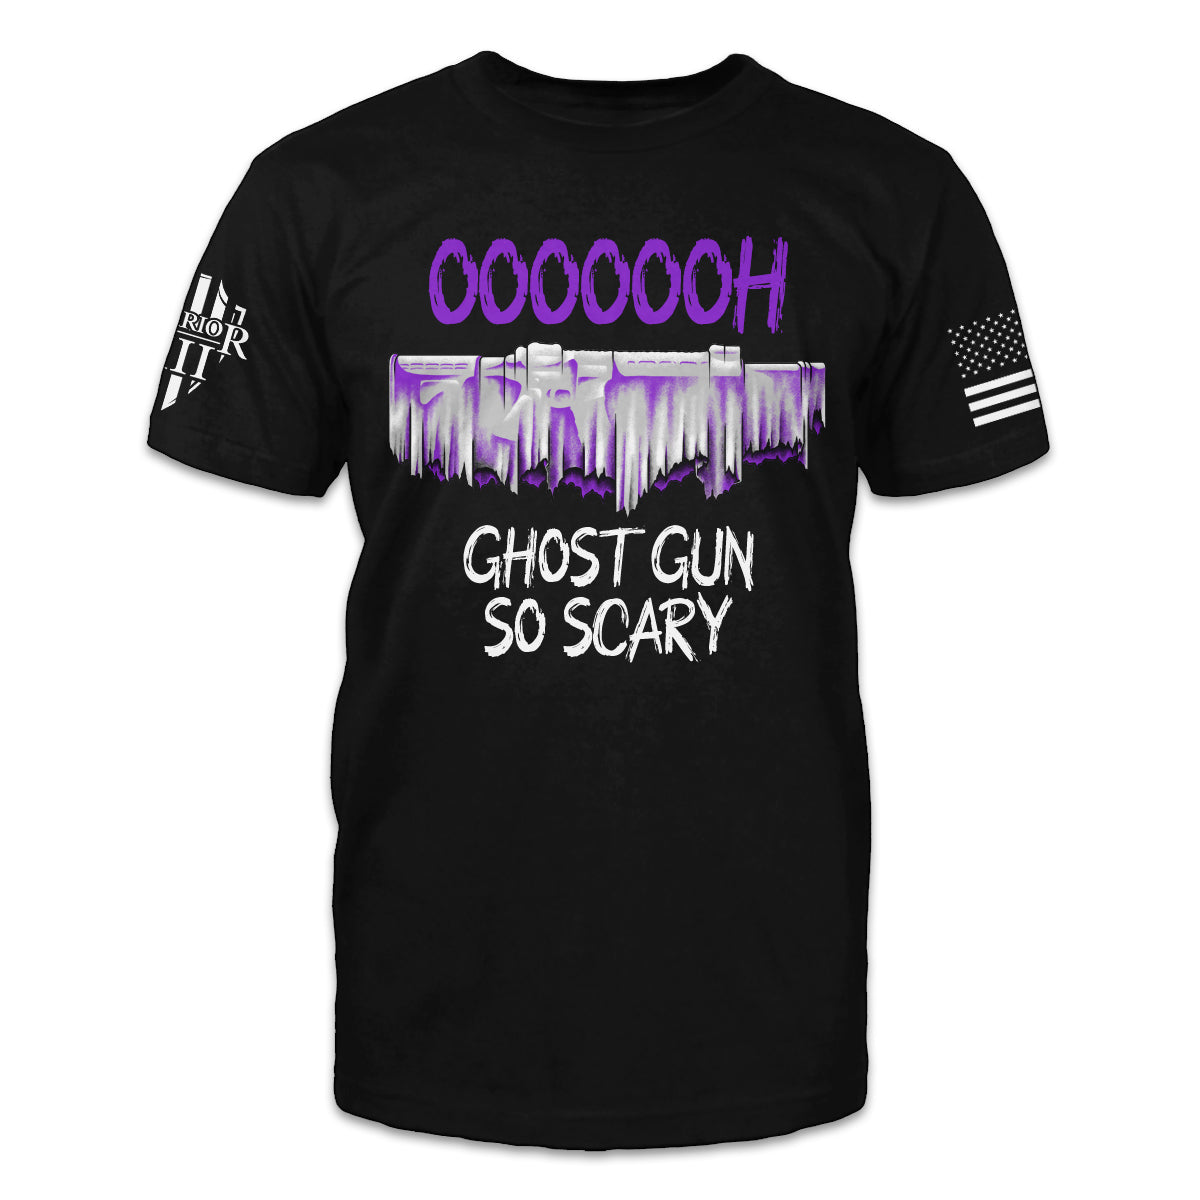 A black t-shirt with an image on the front of an AR-15 rifle under a sheet with words surrounding it "OOOOOOH, Ghost gun, So Scary"